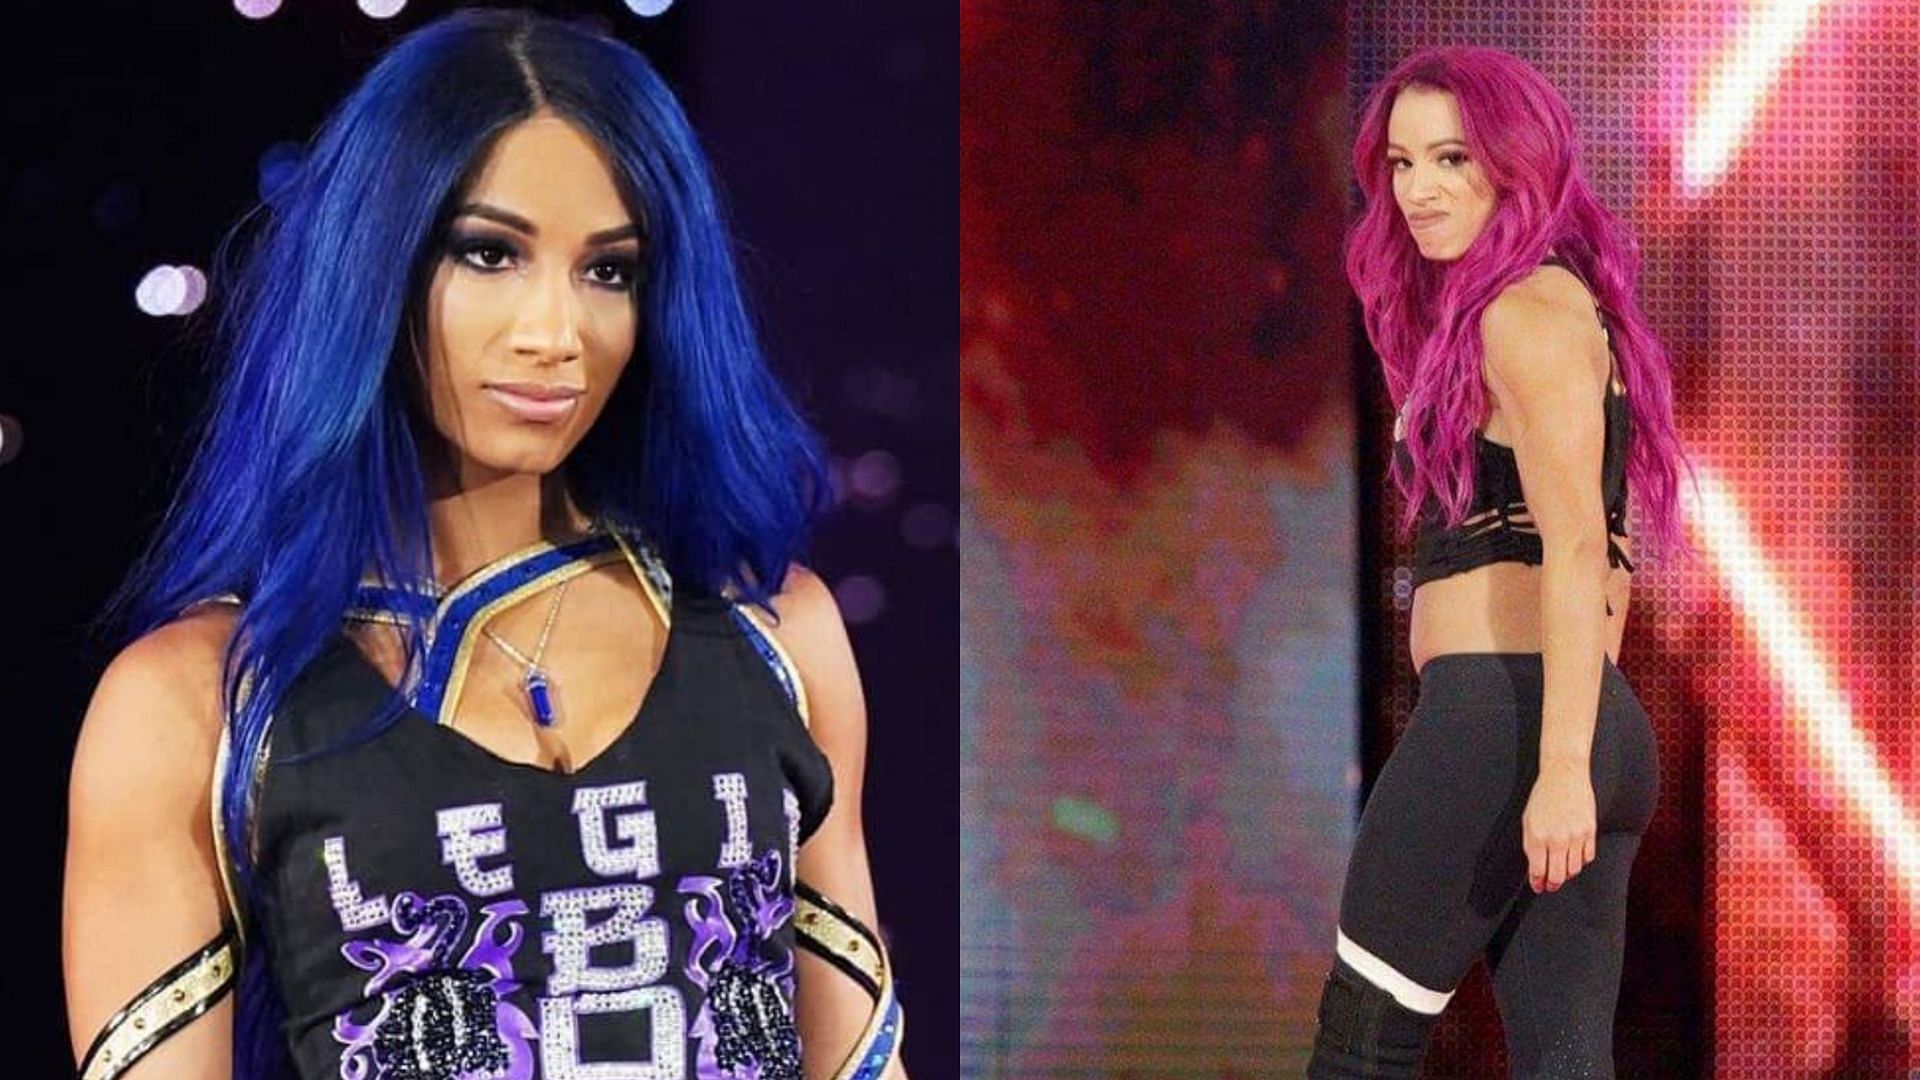 Would Sasha Banks join AEW in the future?